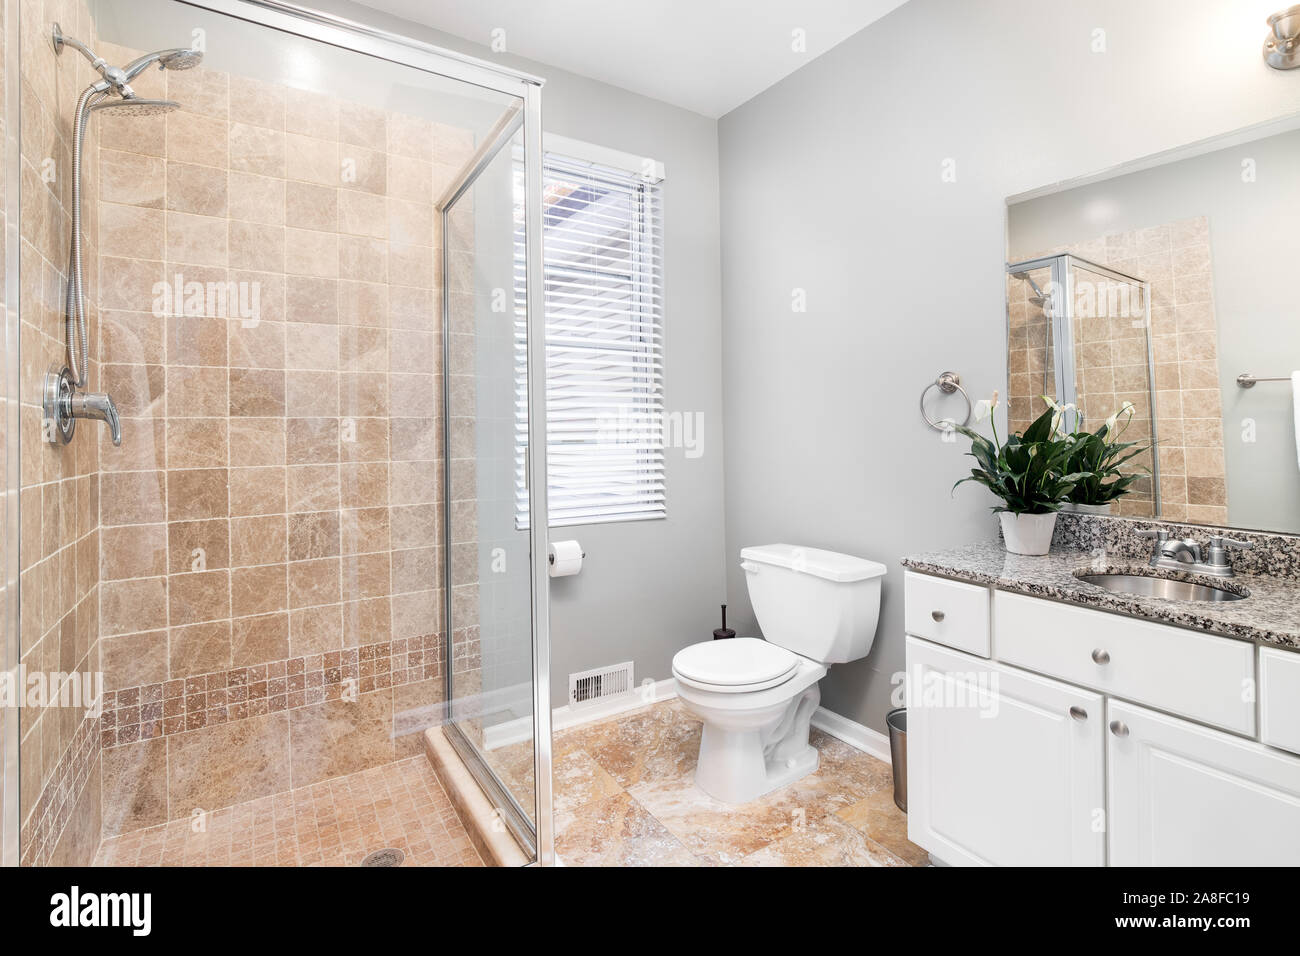 https://c8.alamy.com/comp/2A8FC19/a-small-luxurious-bathroom-with-a-stand-up-shower-and-brown-marble-tiles-lining-the-floor-and-shower-a-plant-is-put-on-the-dark-marble-2A8FC19.jpg